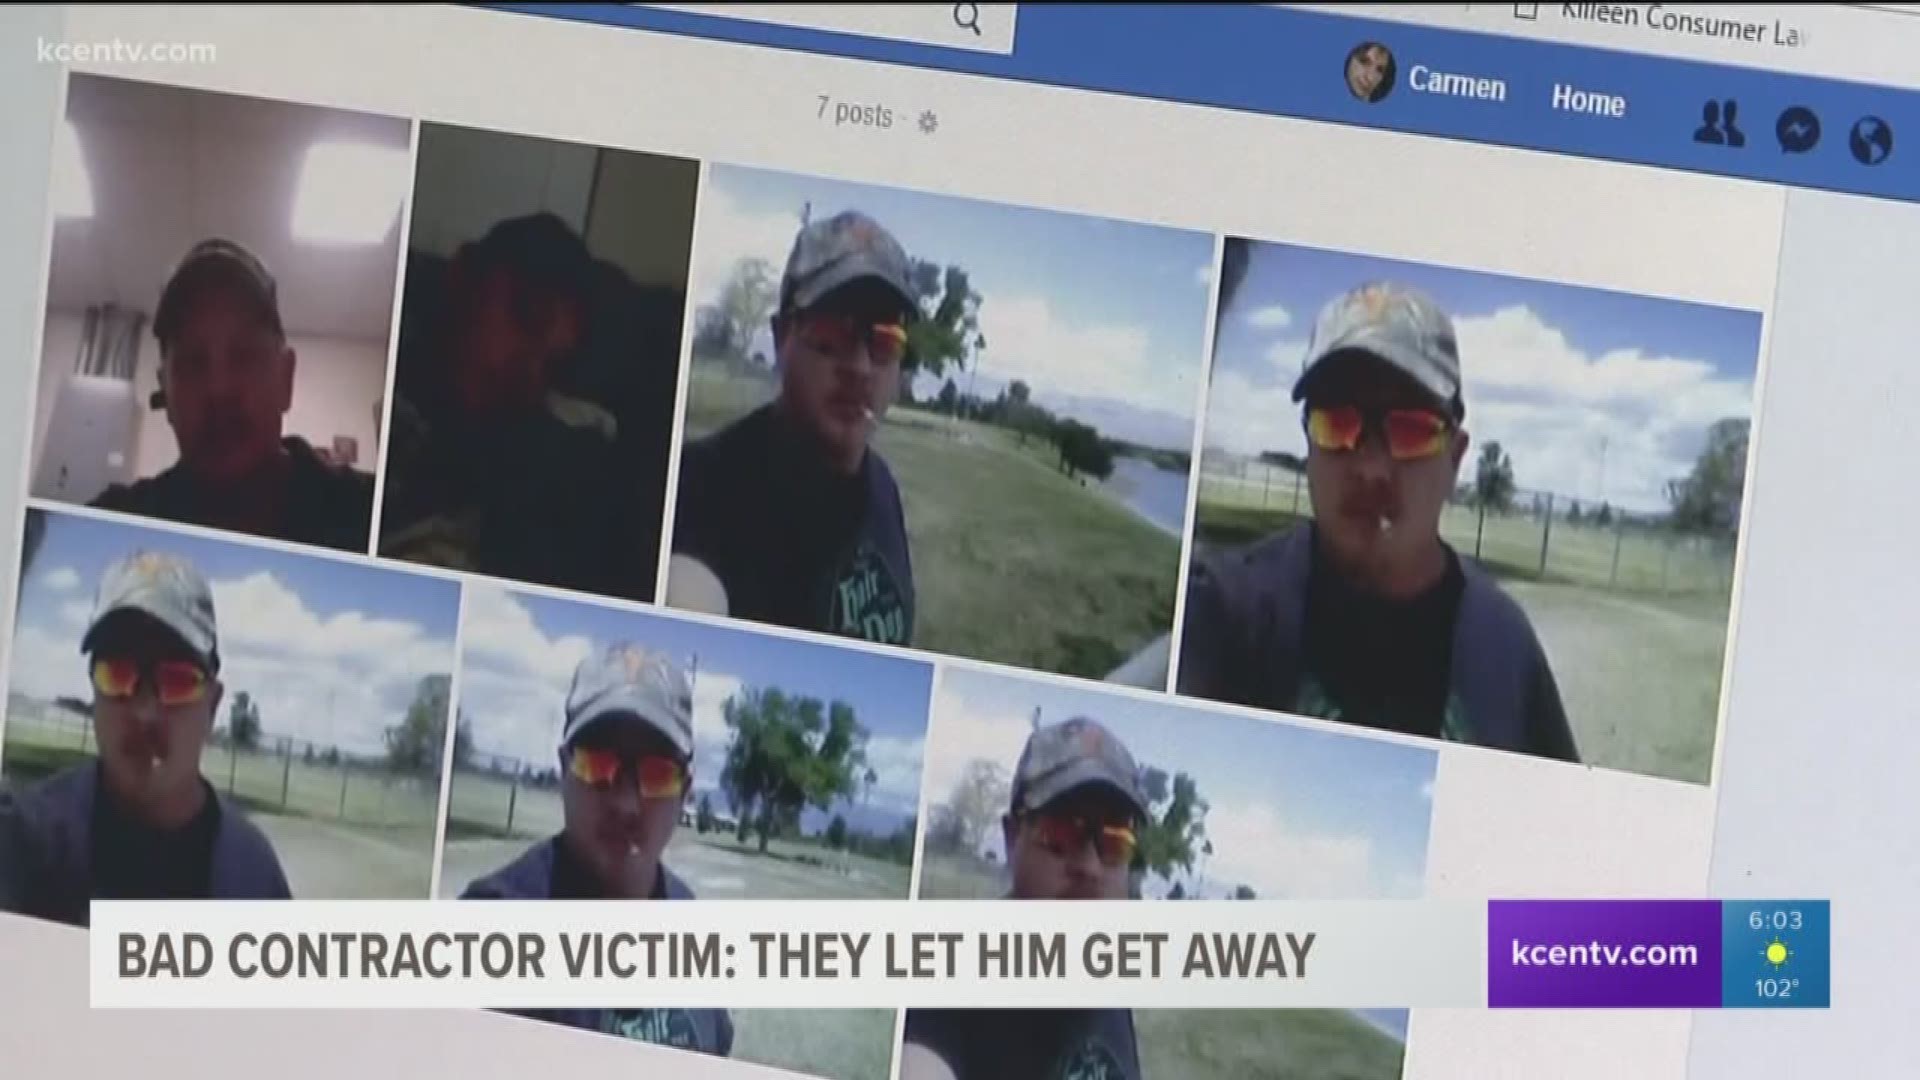 Contractor Verdon Bower is still on the loose after the Harker Heights Police Department put a warrant out for him six months ago